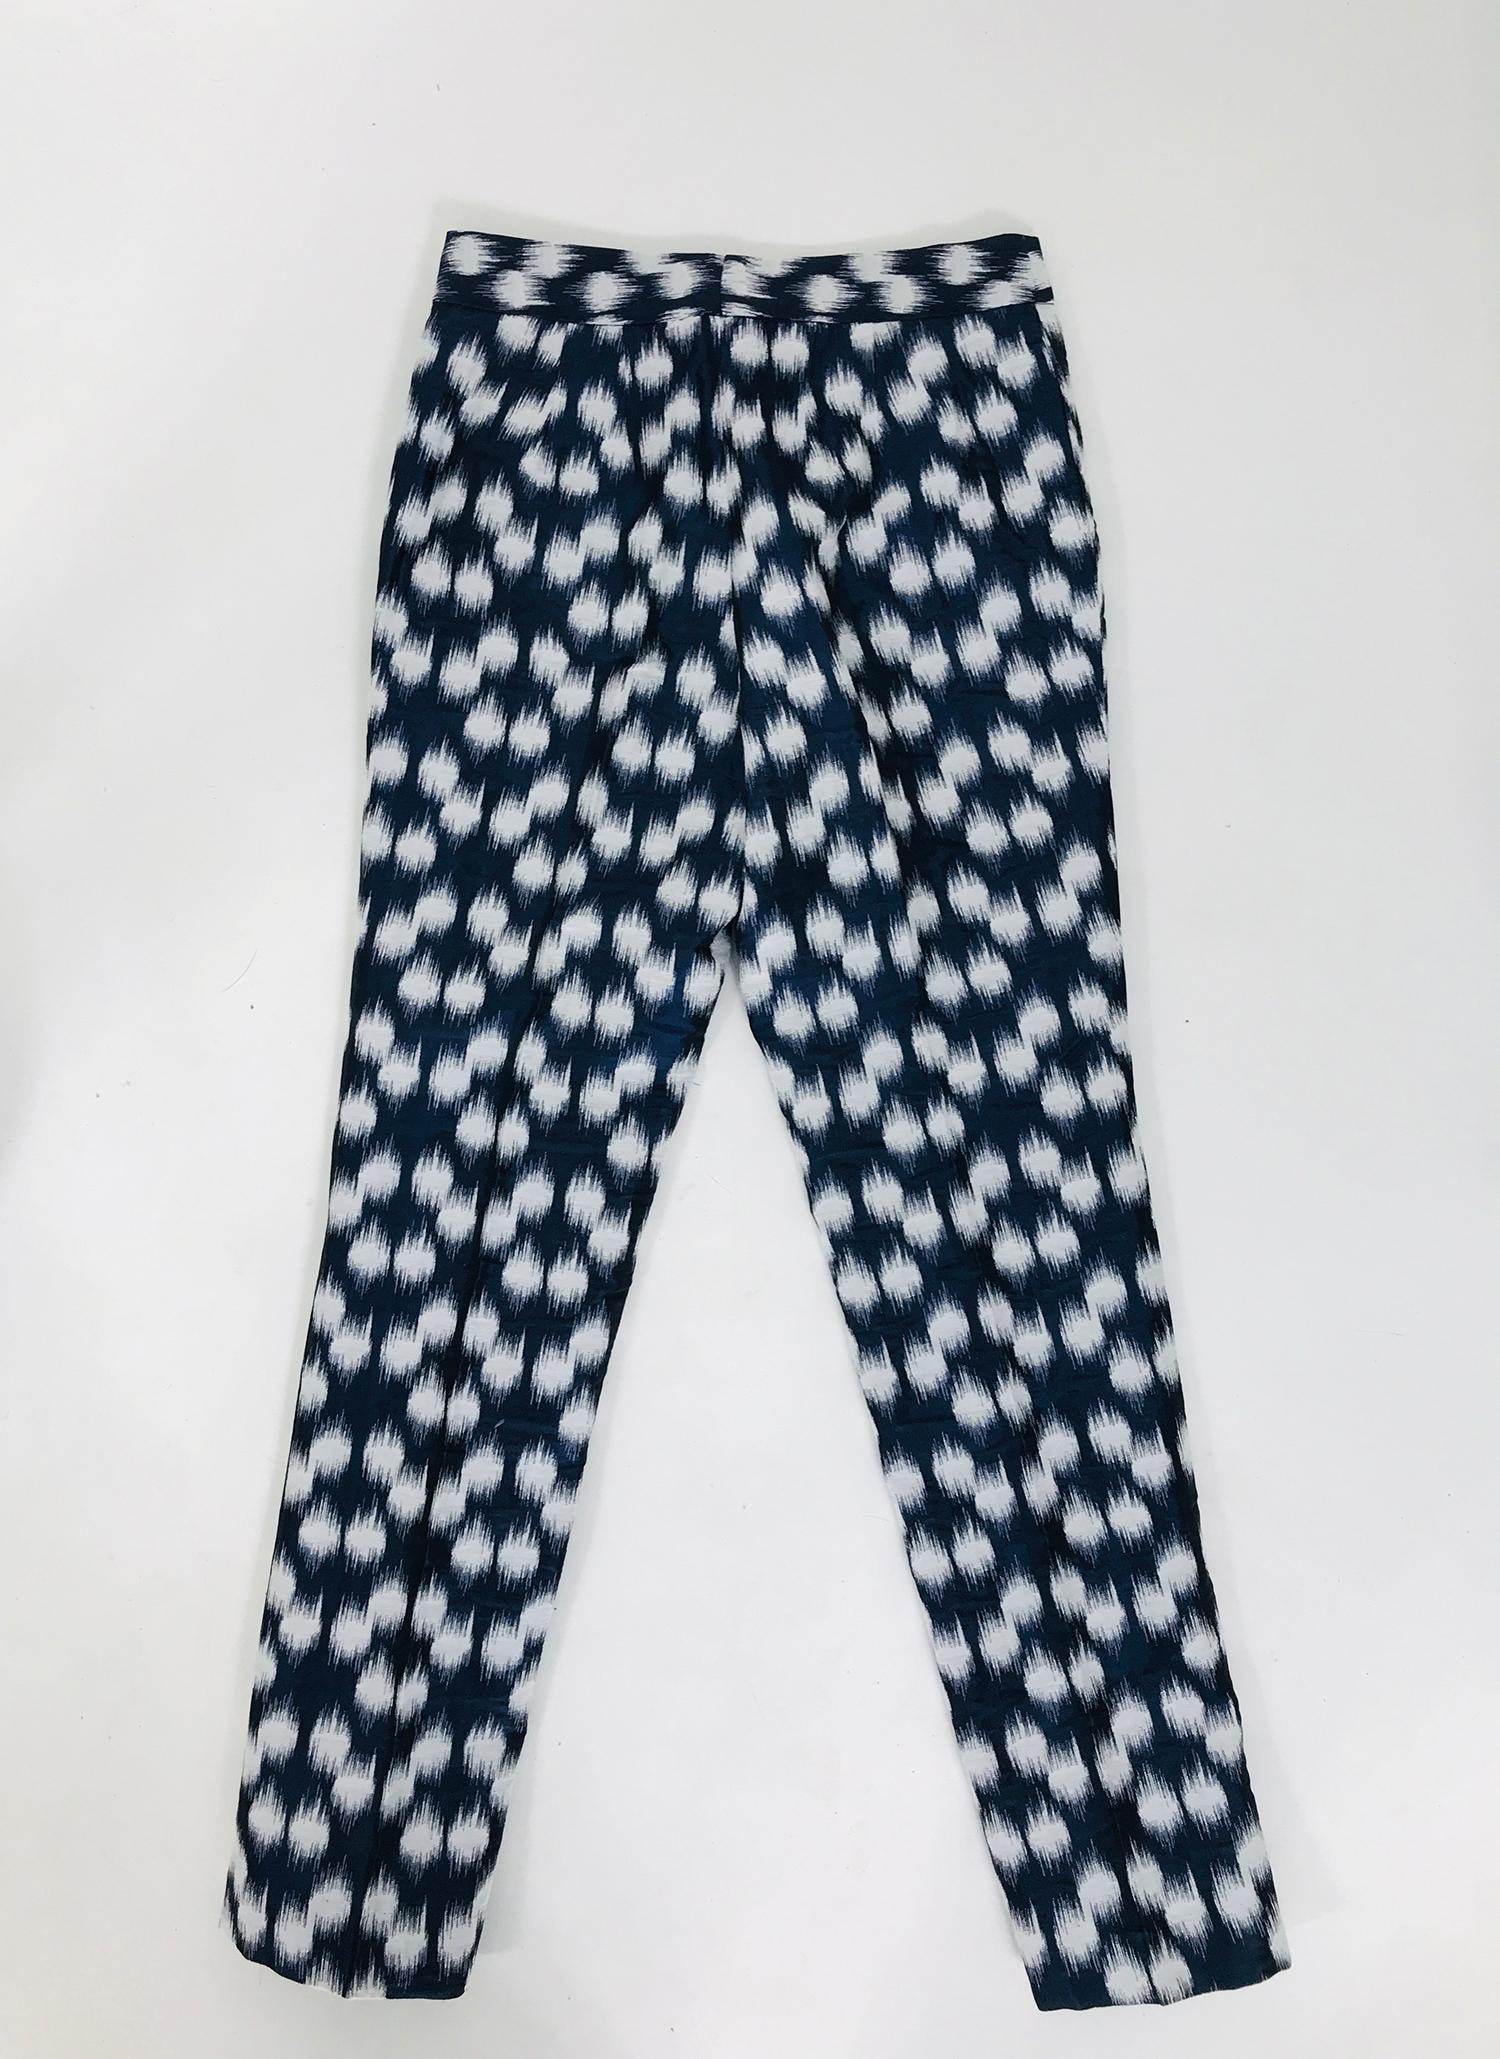 Josie Natori Ikat Woven Trouser in Blue Black Metallic & White  In Excellent Condition For Sale In West Palm Beach, FL